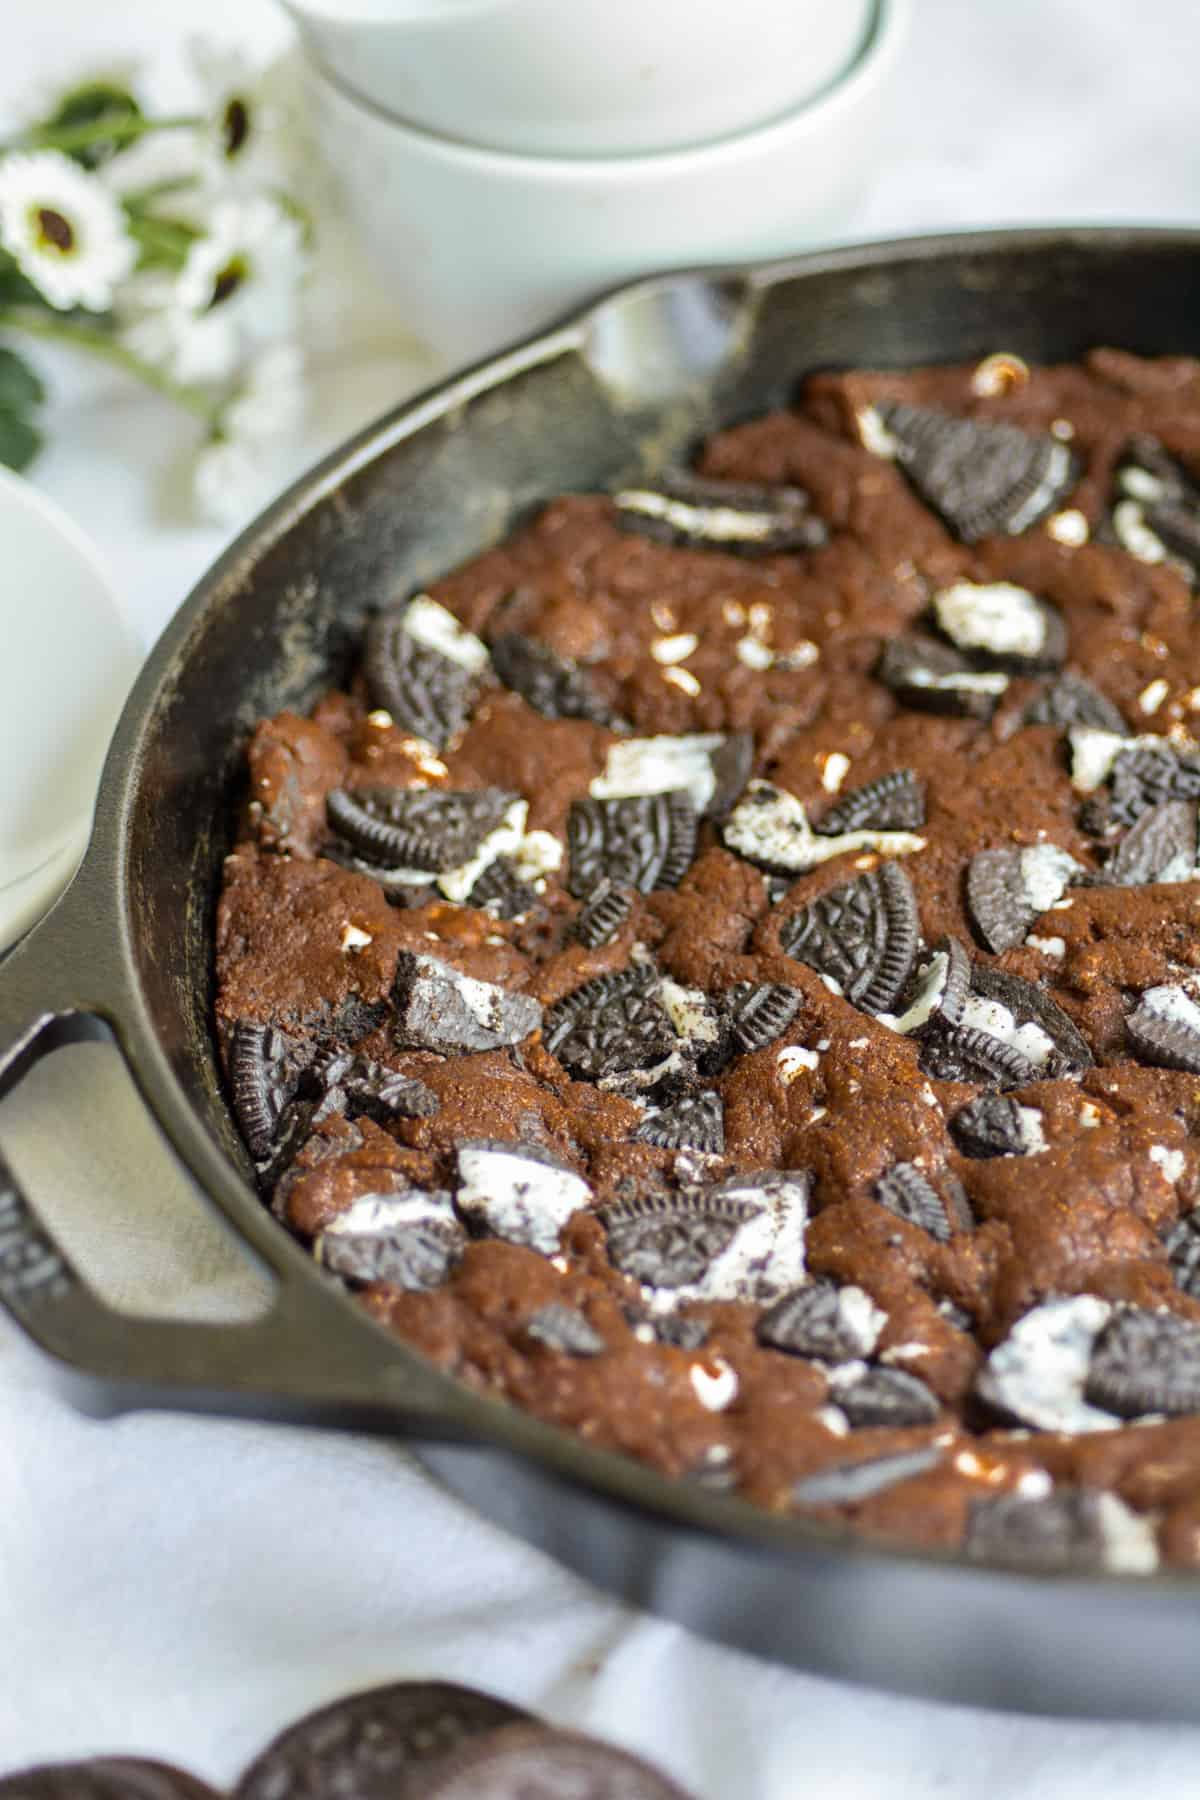 Baked cookies and cream pizookie in a skillet